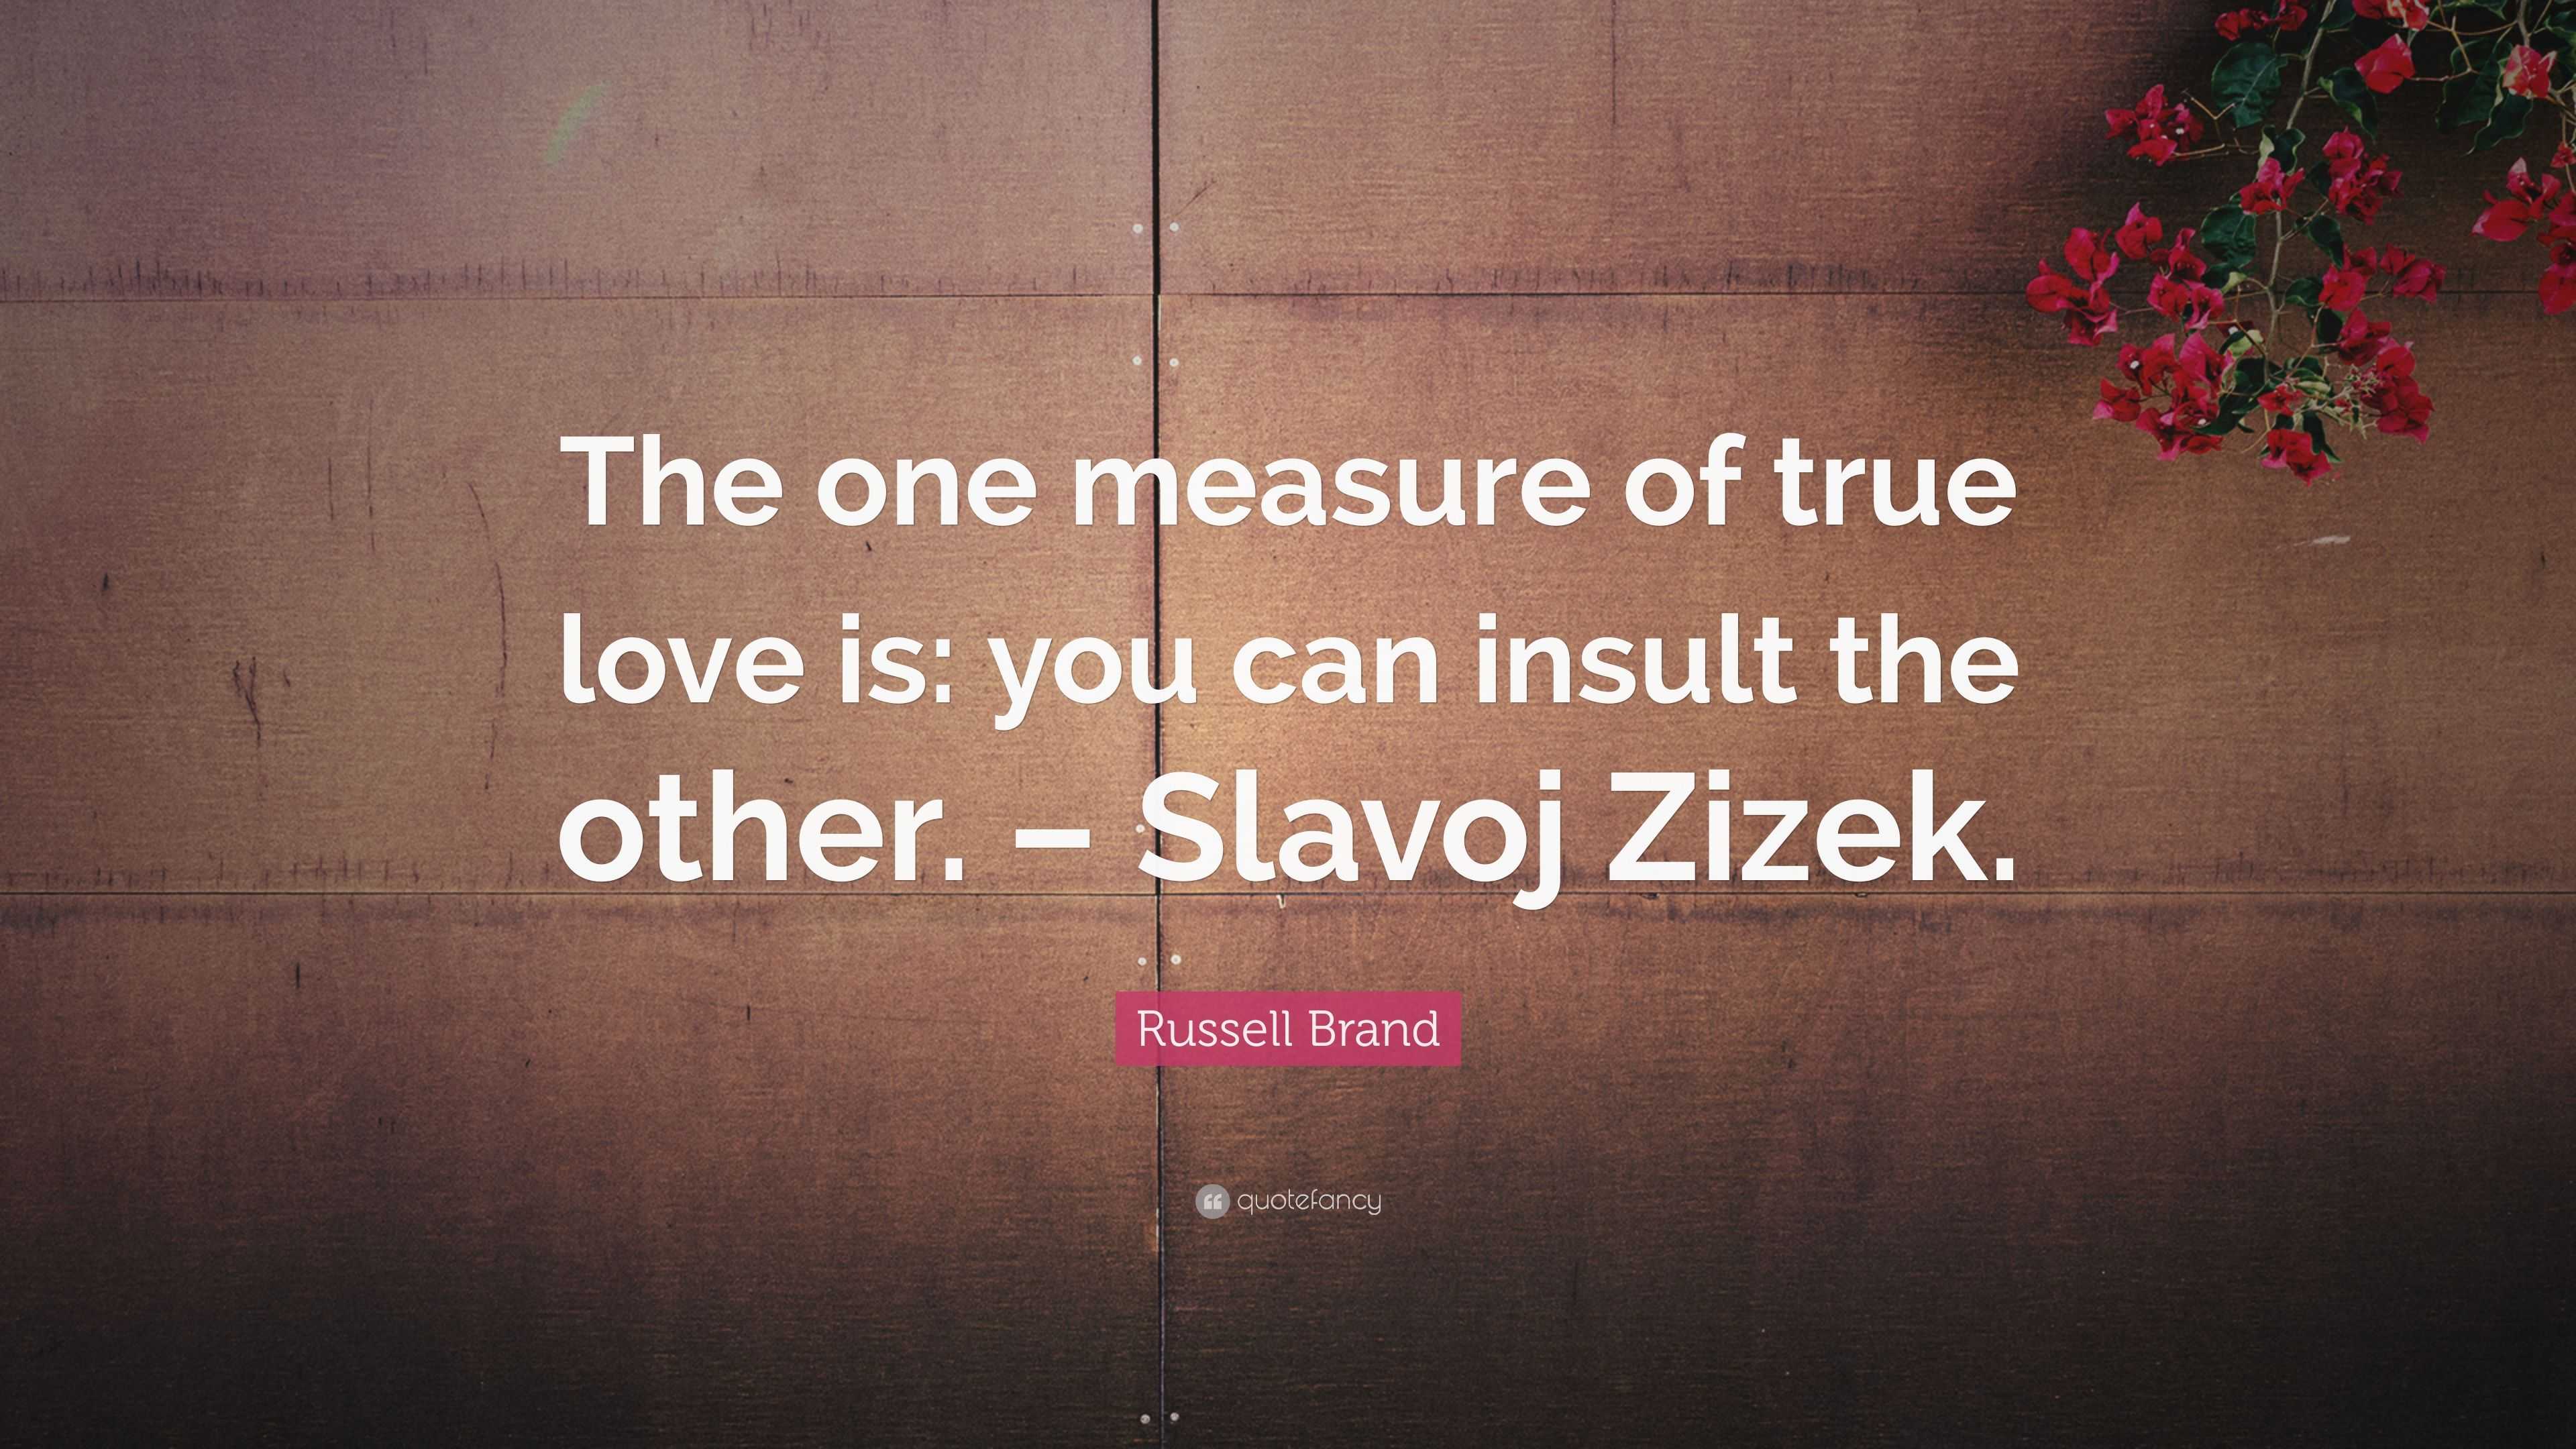 Russell Brand Quote “The one measure of true love is you can insult